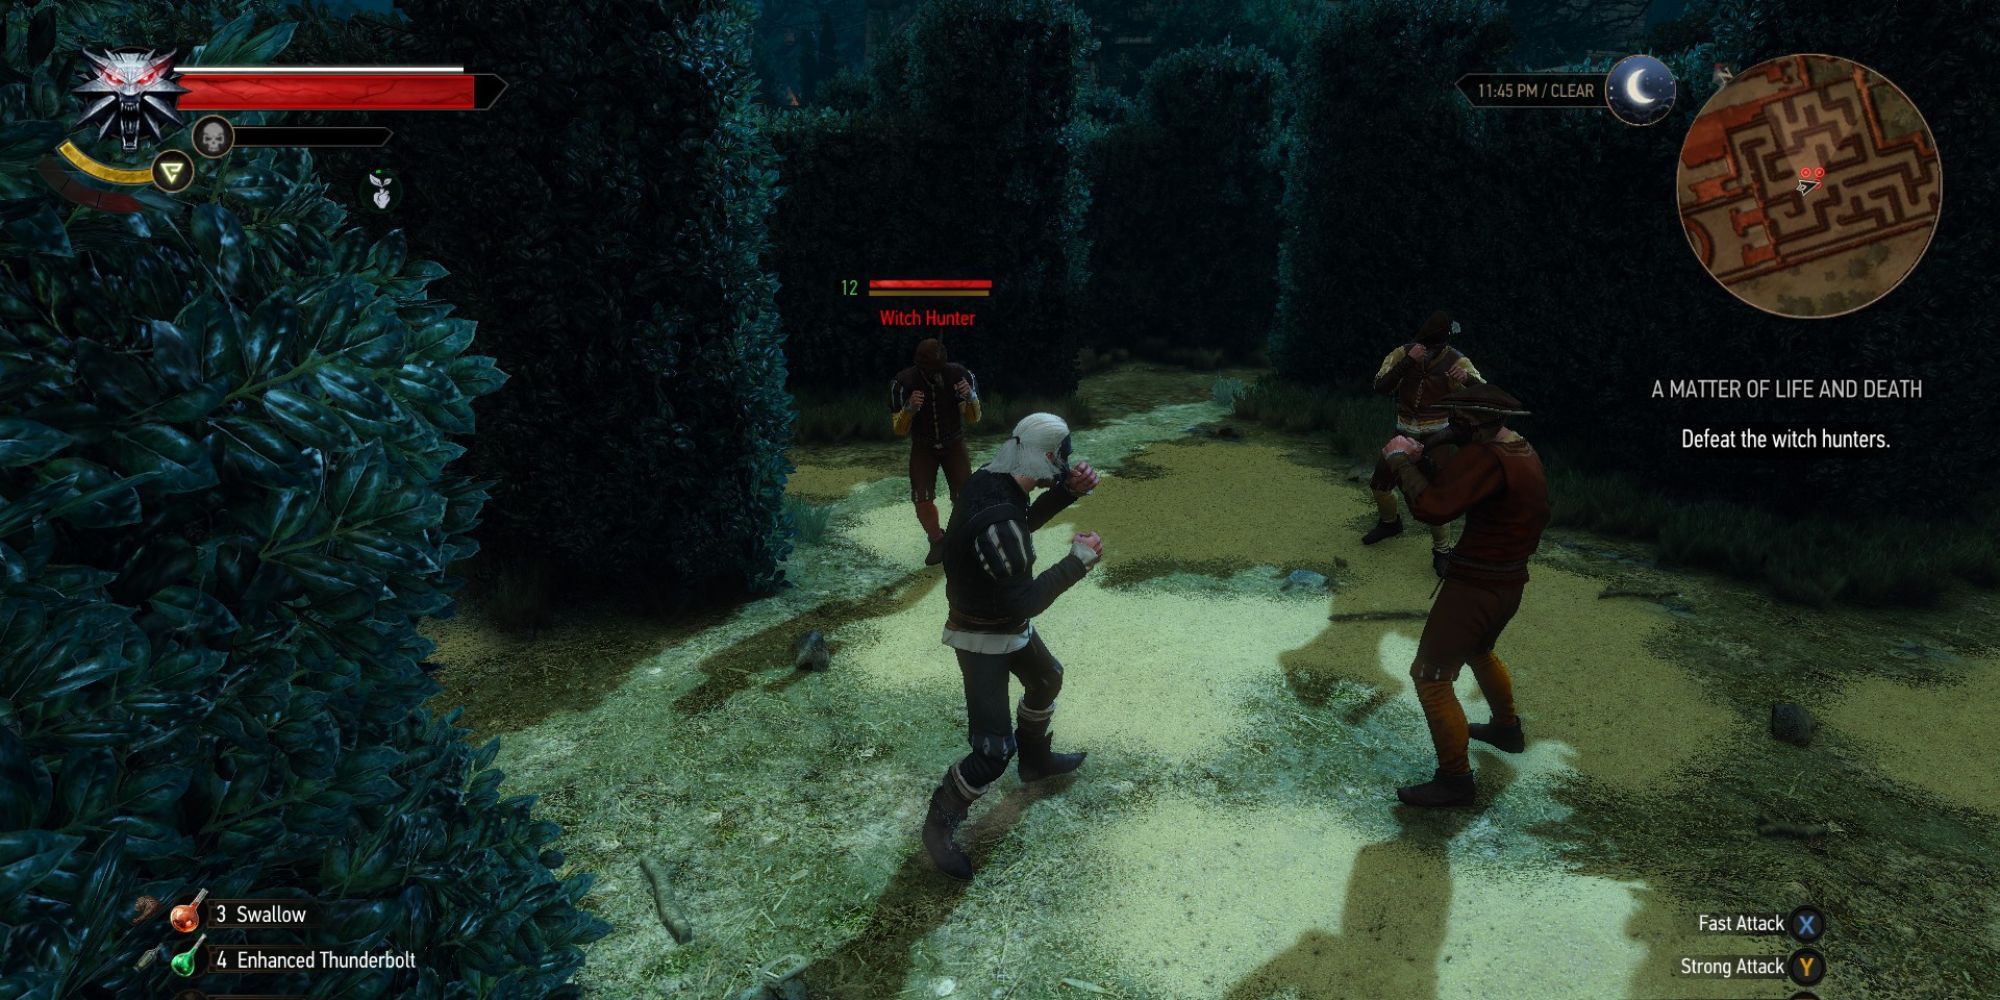 Fighting off some witch hunters after switching masks with Albert in the quest a matter of life and death